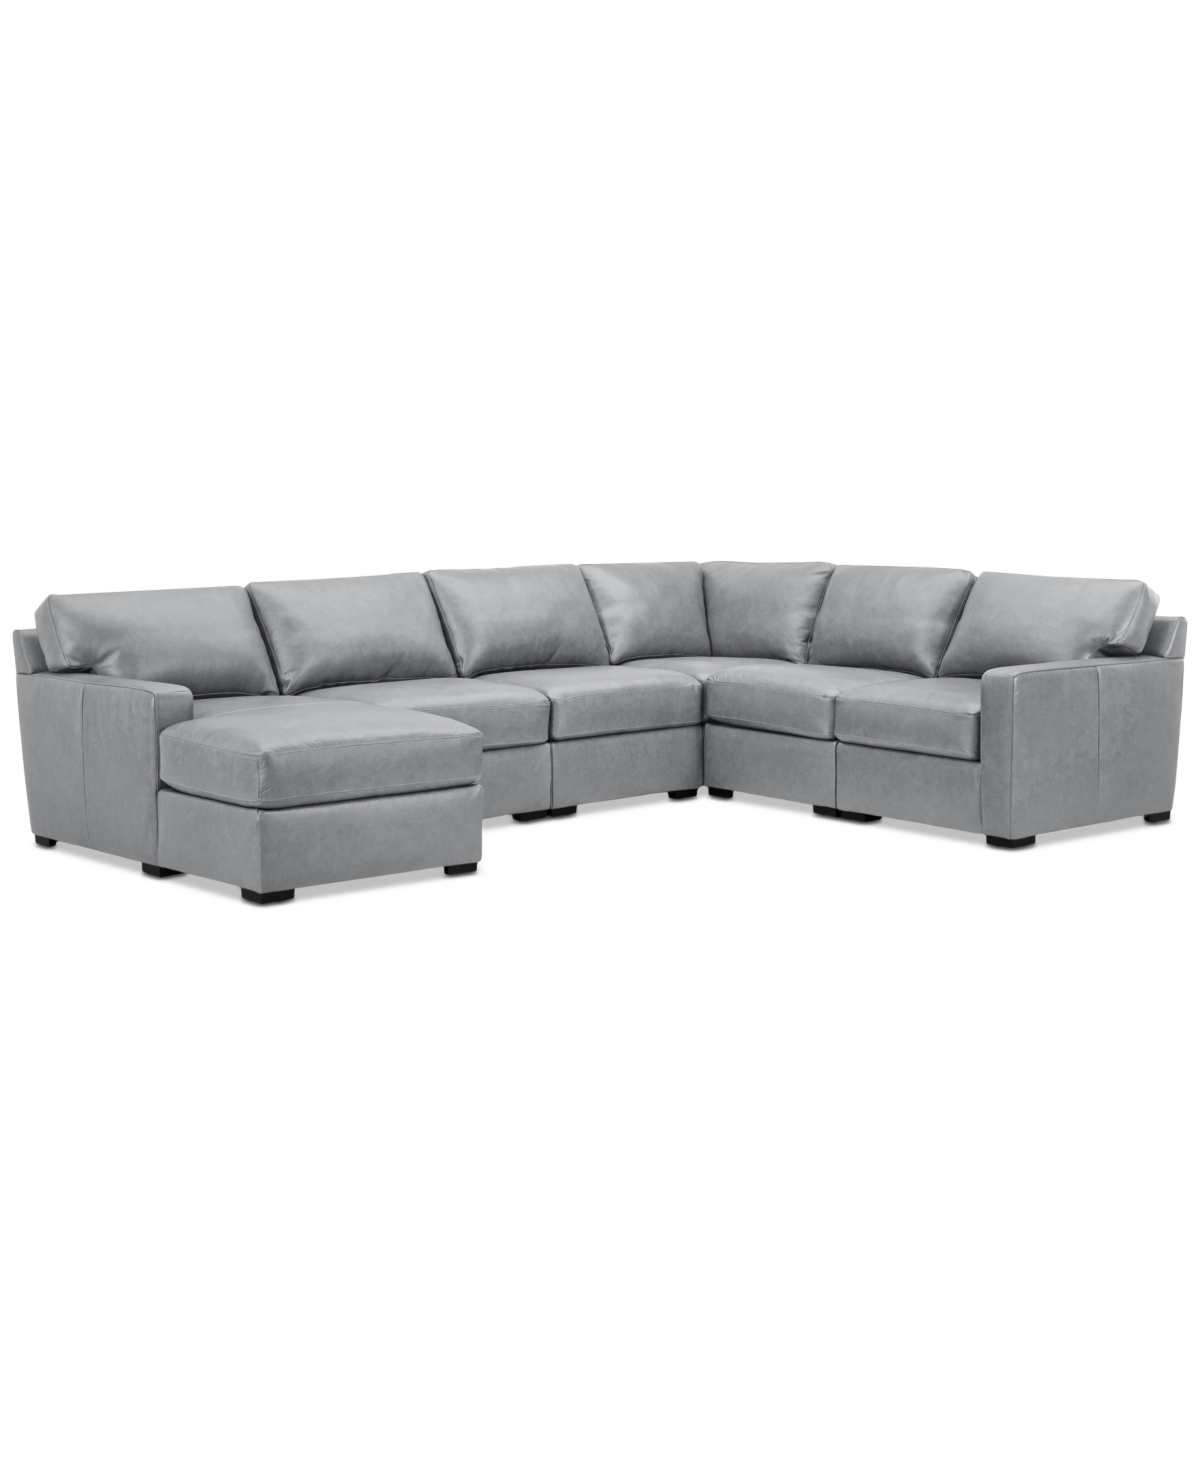 Macy's Radley 129" 6-pc. Leather Square Corner Modular Chaise Sectional, Created For  In Light Grey